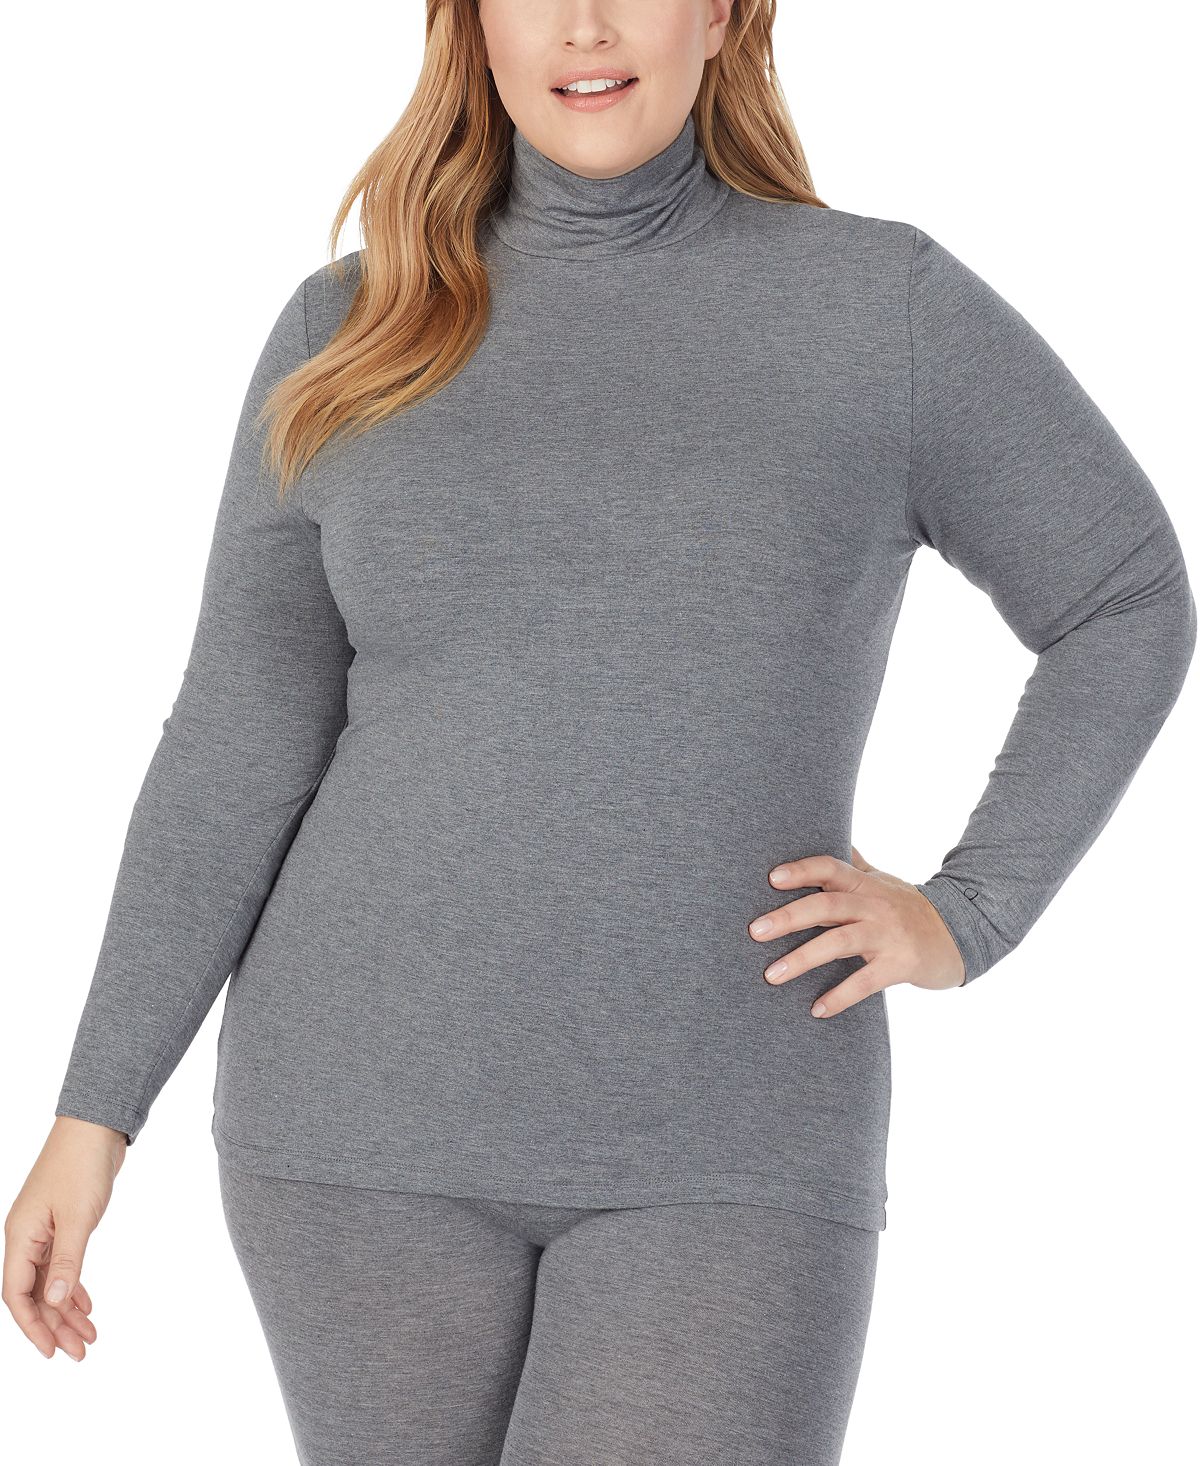 Cuddl Duds Plus Softwear With Stretch Long-sleeve Turtleneck Top